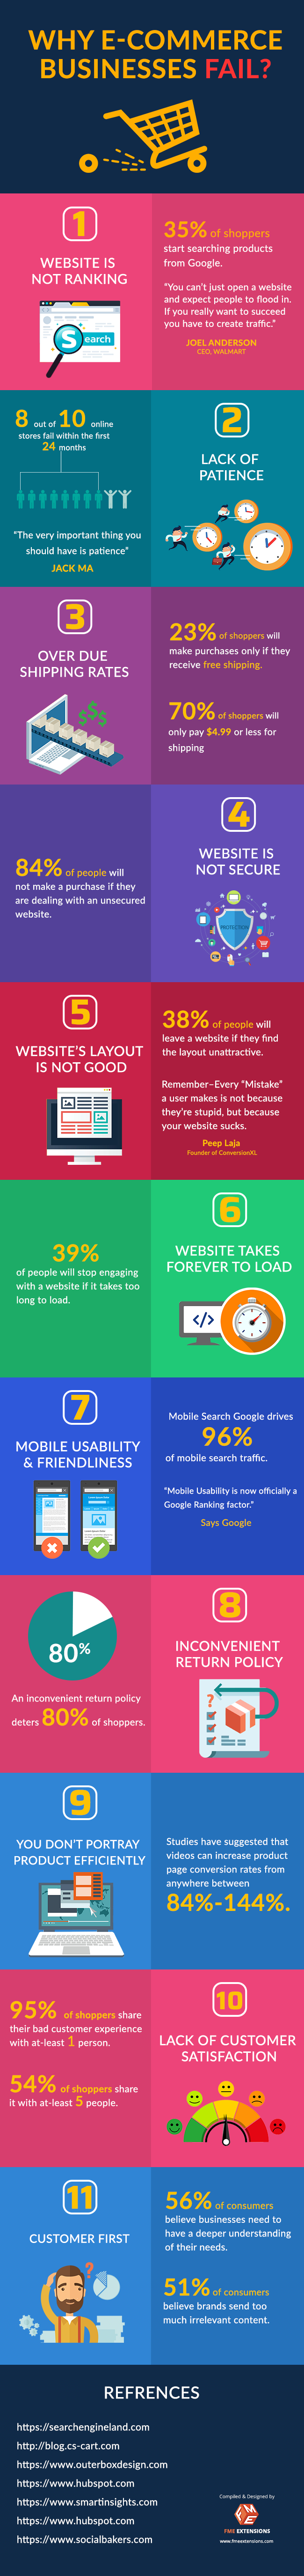 A Statistical Analysis on Why eCommerce Businesses Fail [Infographic]